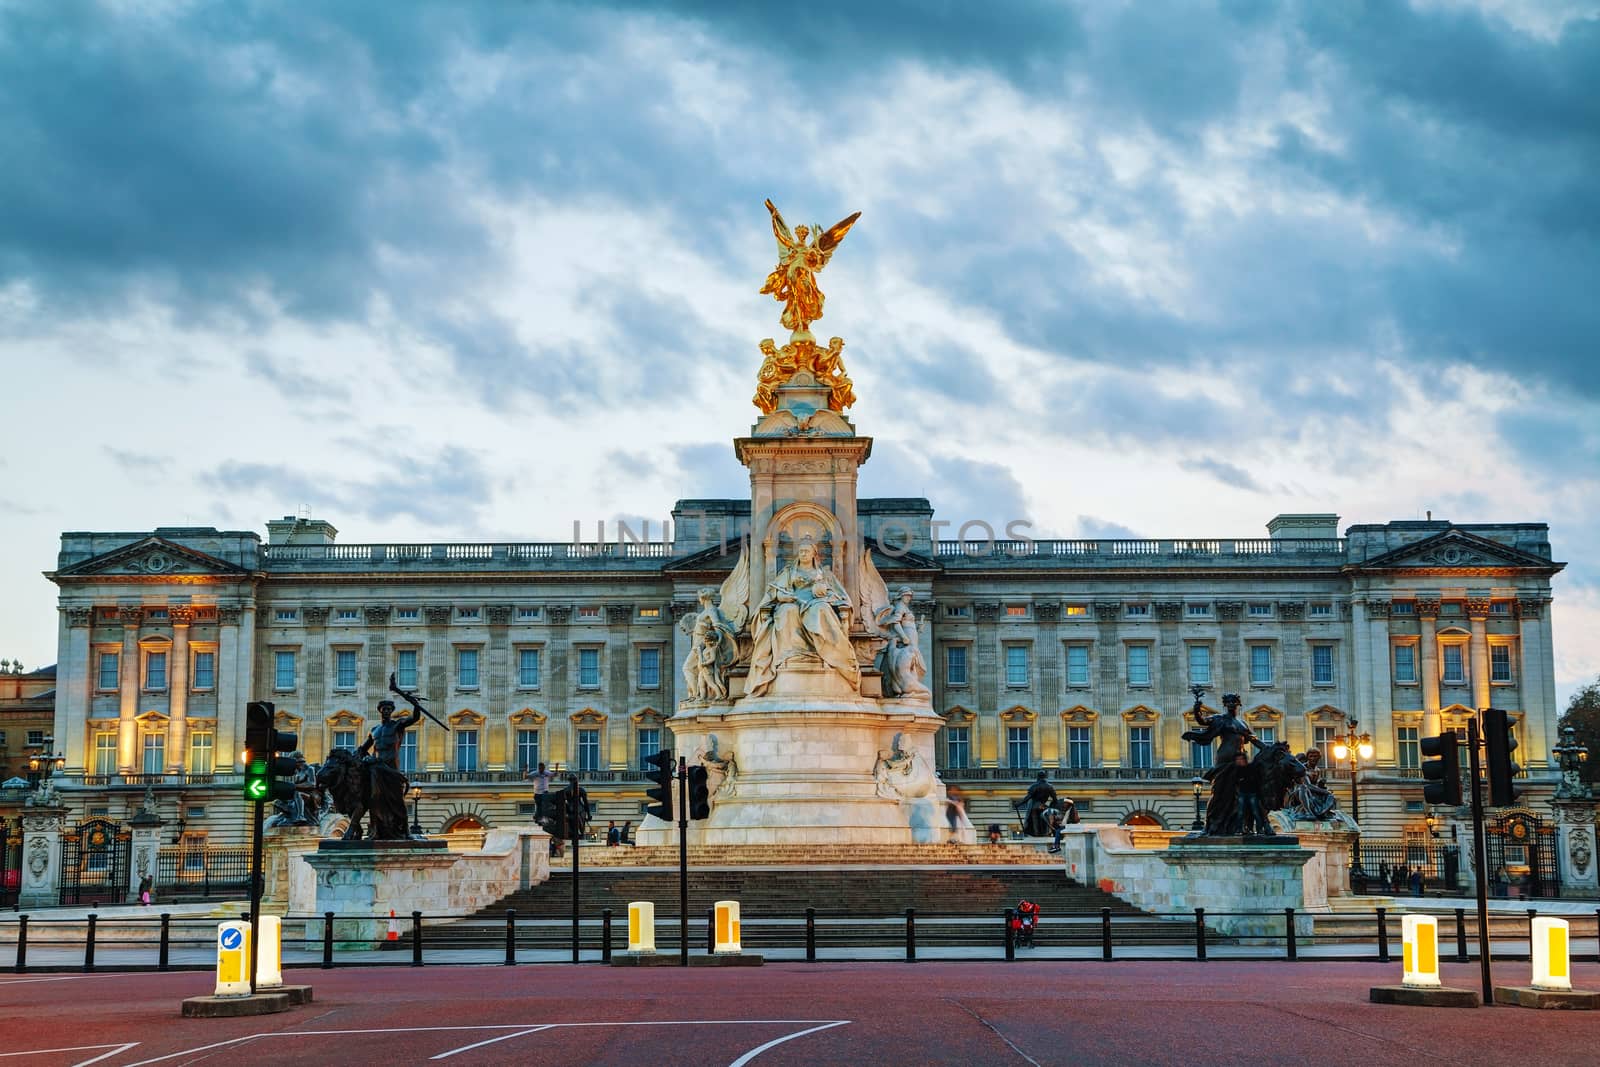 Buckingham palace in London, Great Britain by AndreyKr